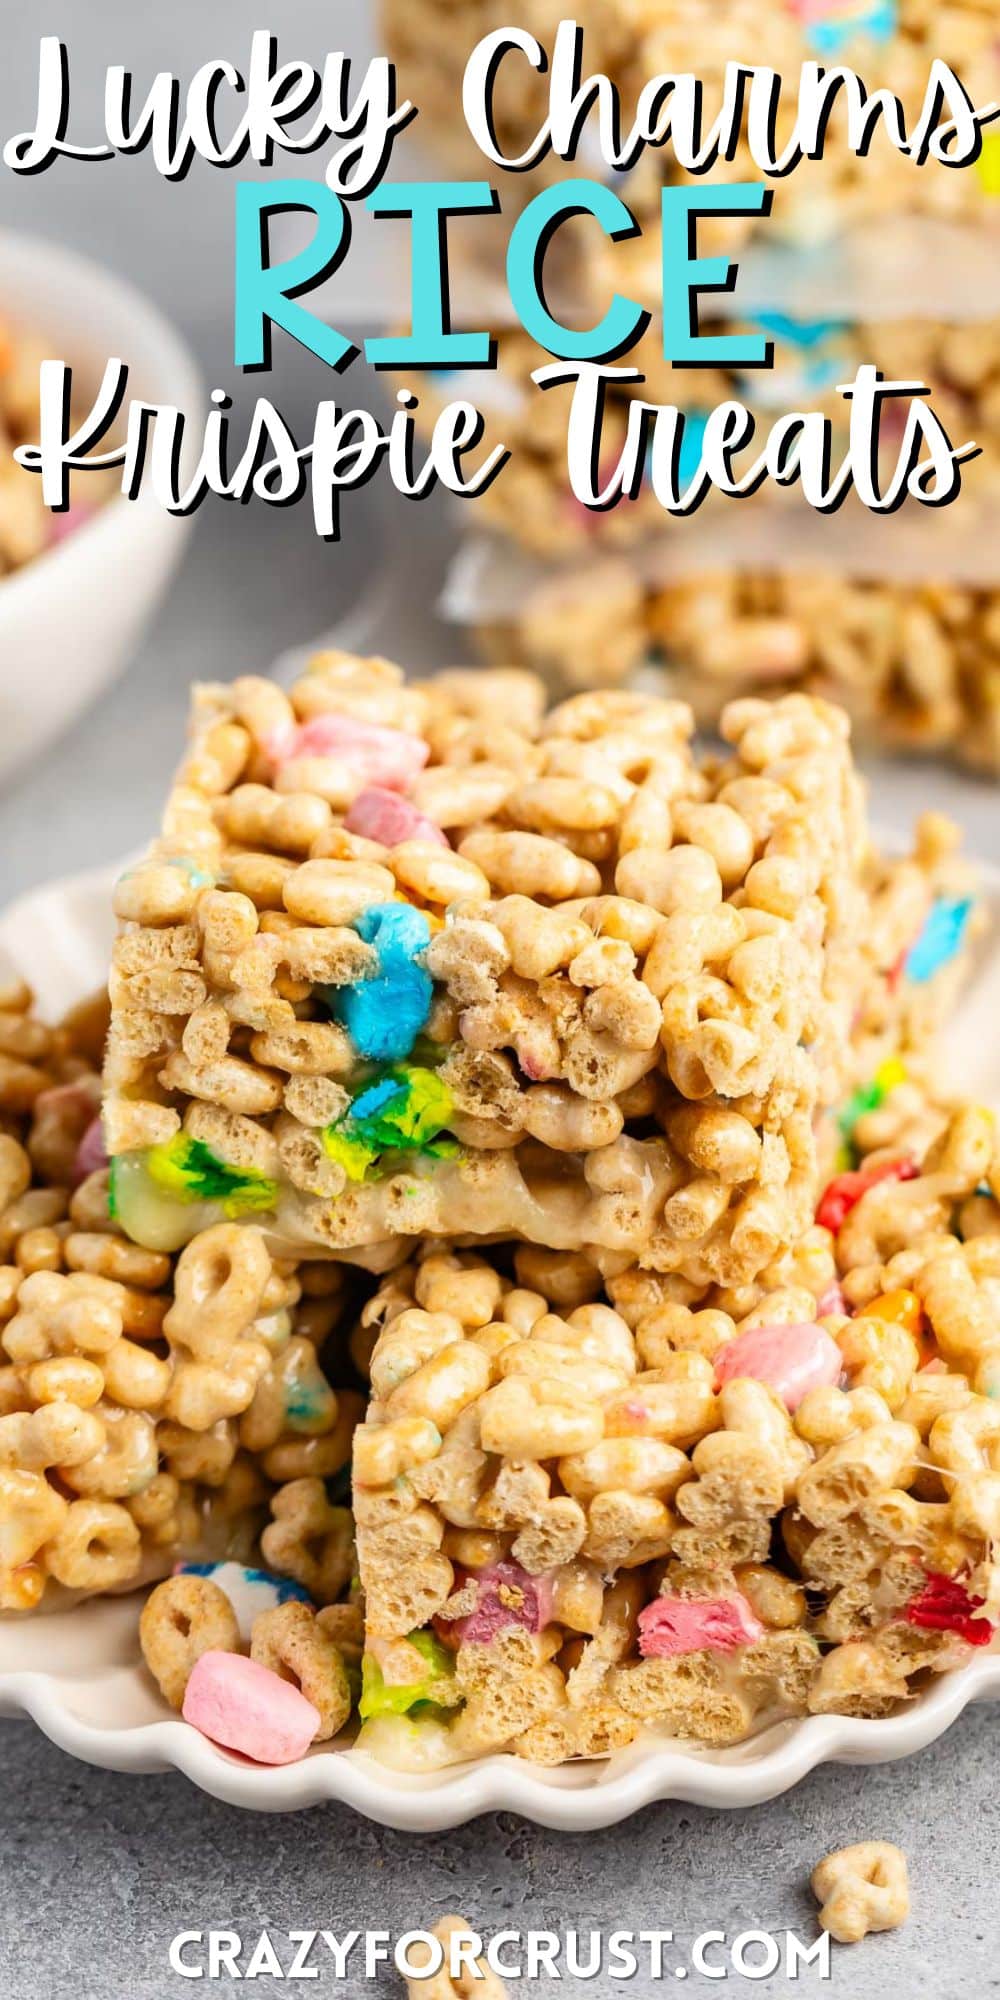 stacked Rice Krispie treats made from lucky charms on a white plate with words on the image.